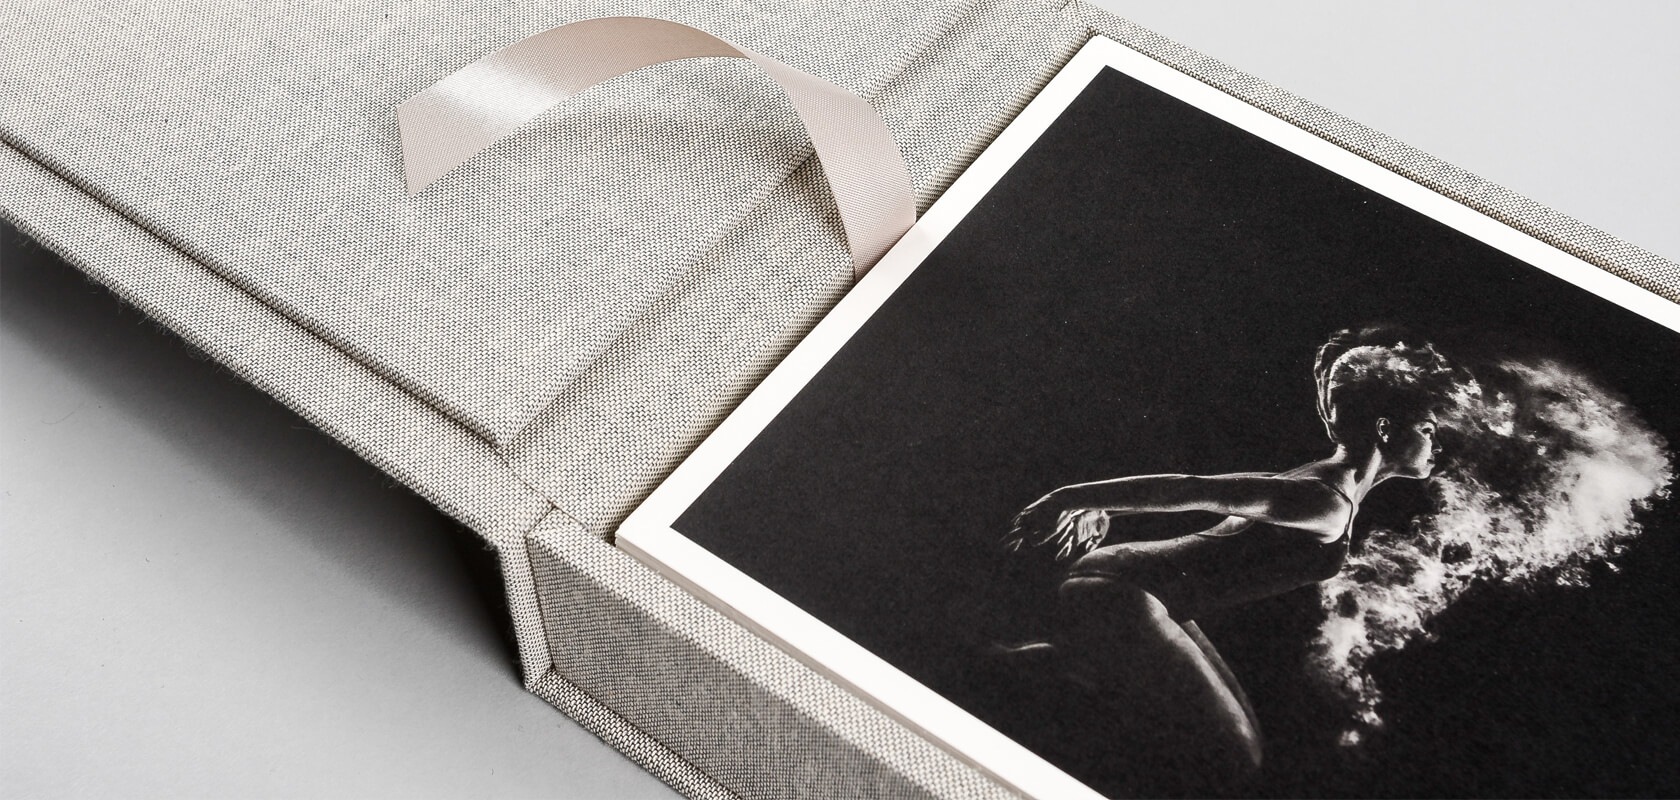 Box for Prints holds up to 50 Signature Art Matte Prints.